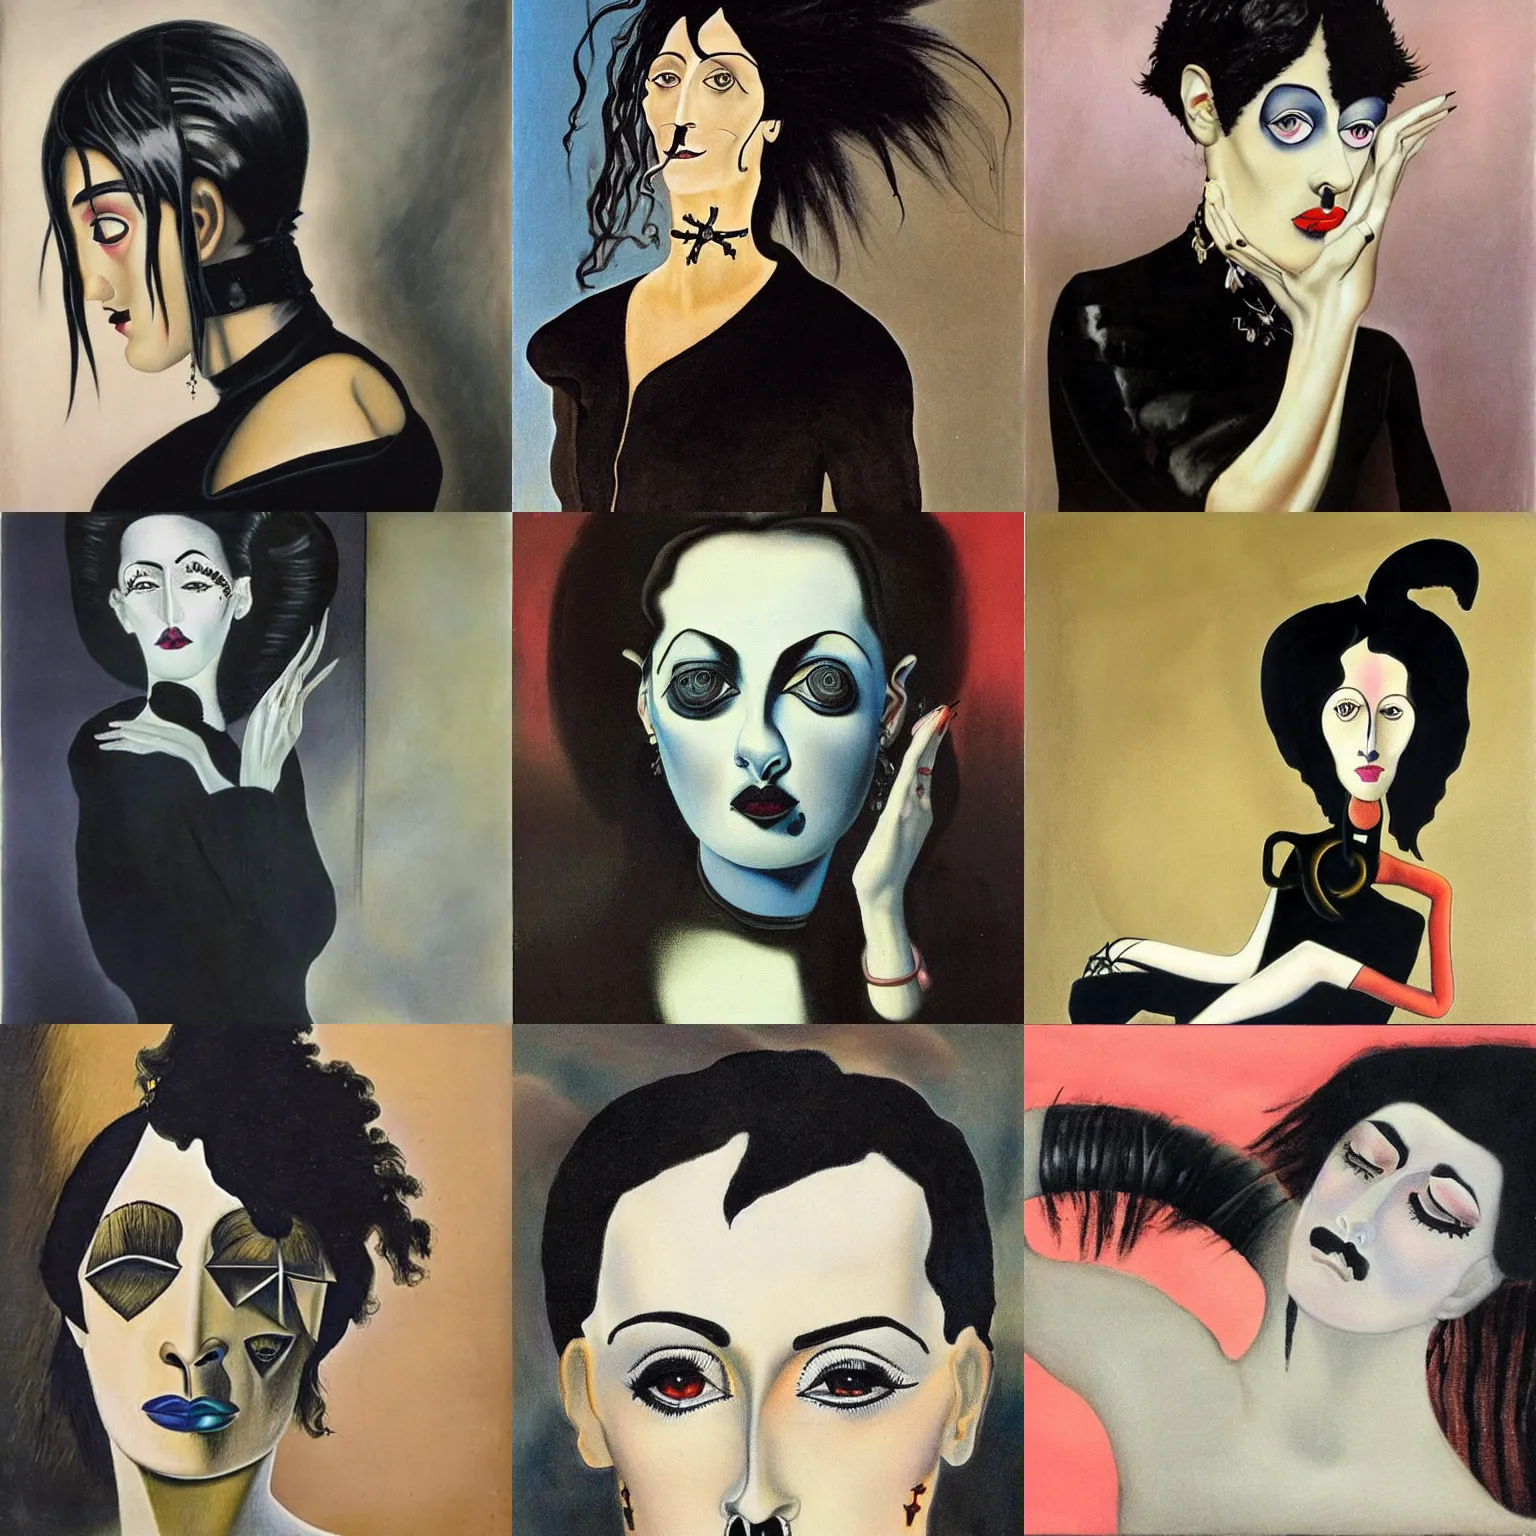 Prompt: A goth portrait painted by Salvador Dali. Her hair is dark brown and cut into a short, messy pixie cut. She has a slightly rounded face, with a pointed chin, large entirely-black eyes, and a small nose. She is wearing a black tank top, a black leather jacket, a black knee-length skirt, a black choker, and black leather boots.